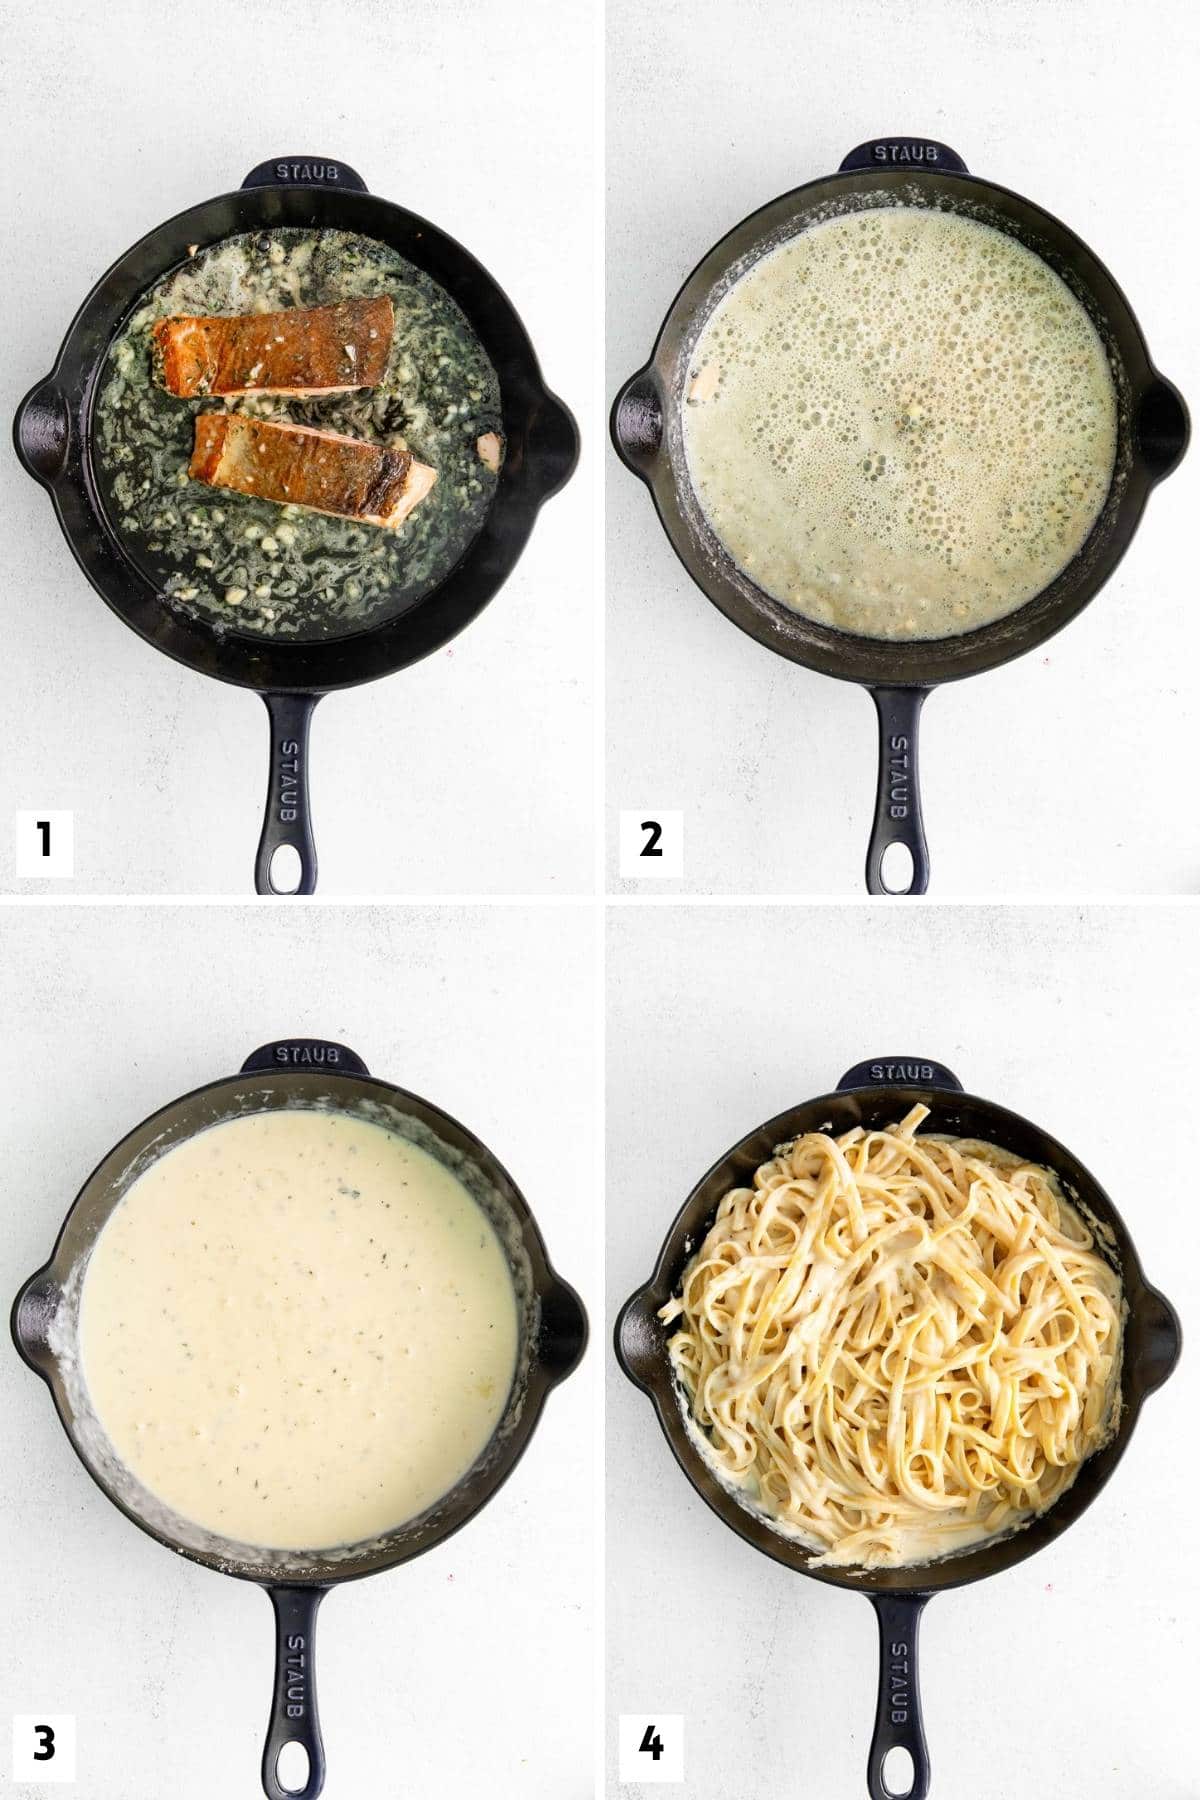 Steps for making salmon pasta from scratch